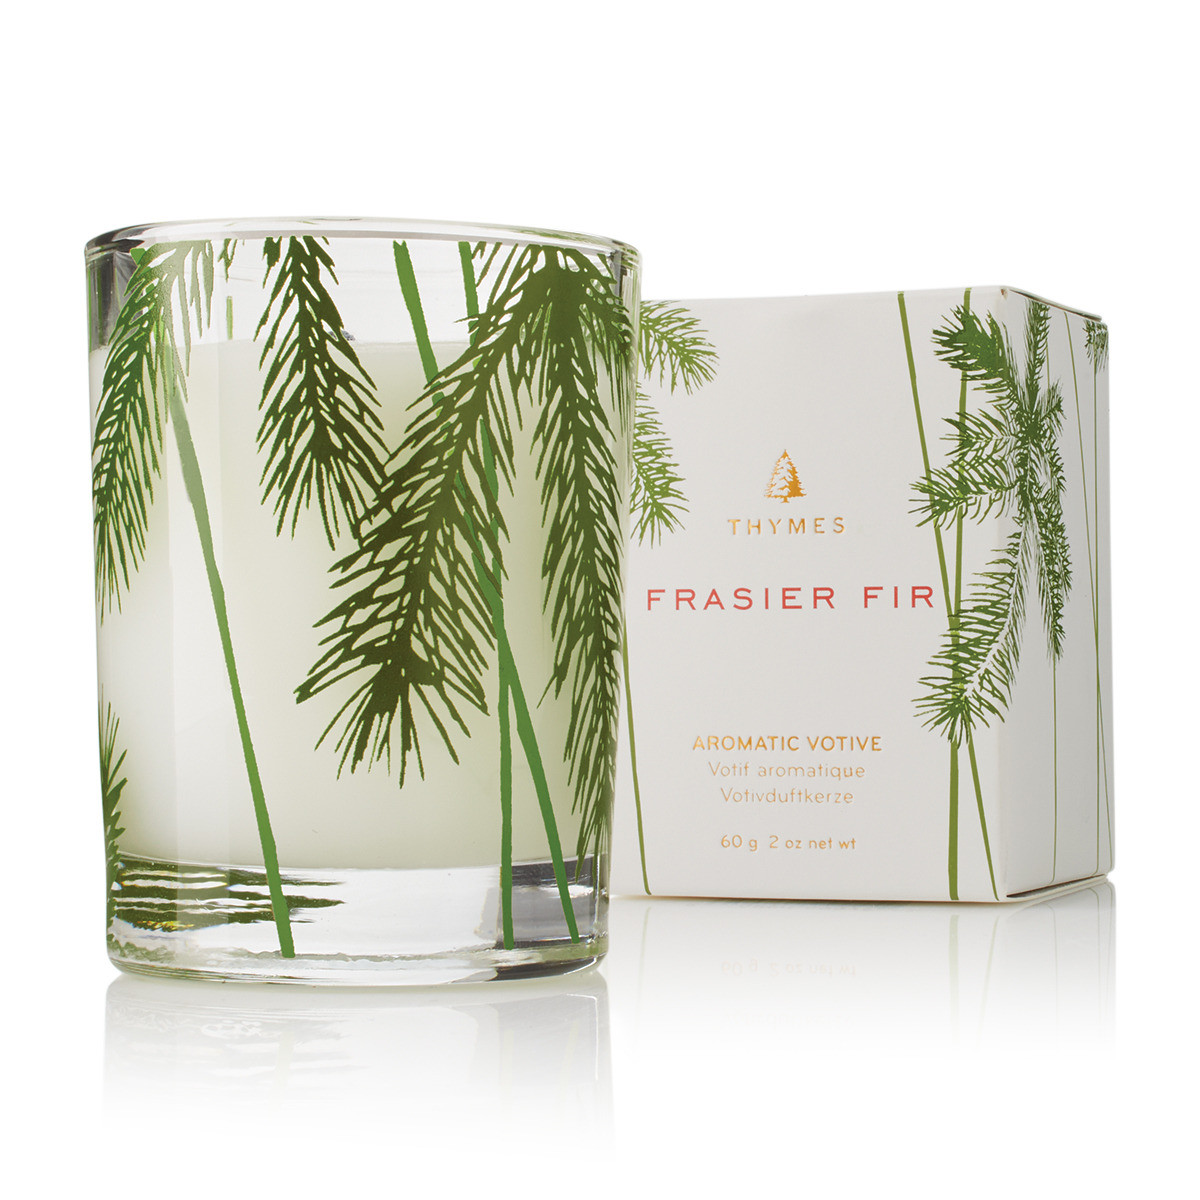 Thymes Frasier Fir votive candle pine needle design 2oz-Carol and Company